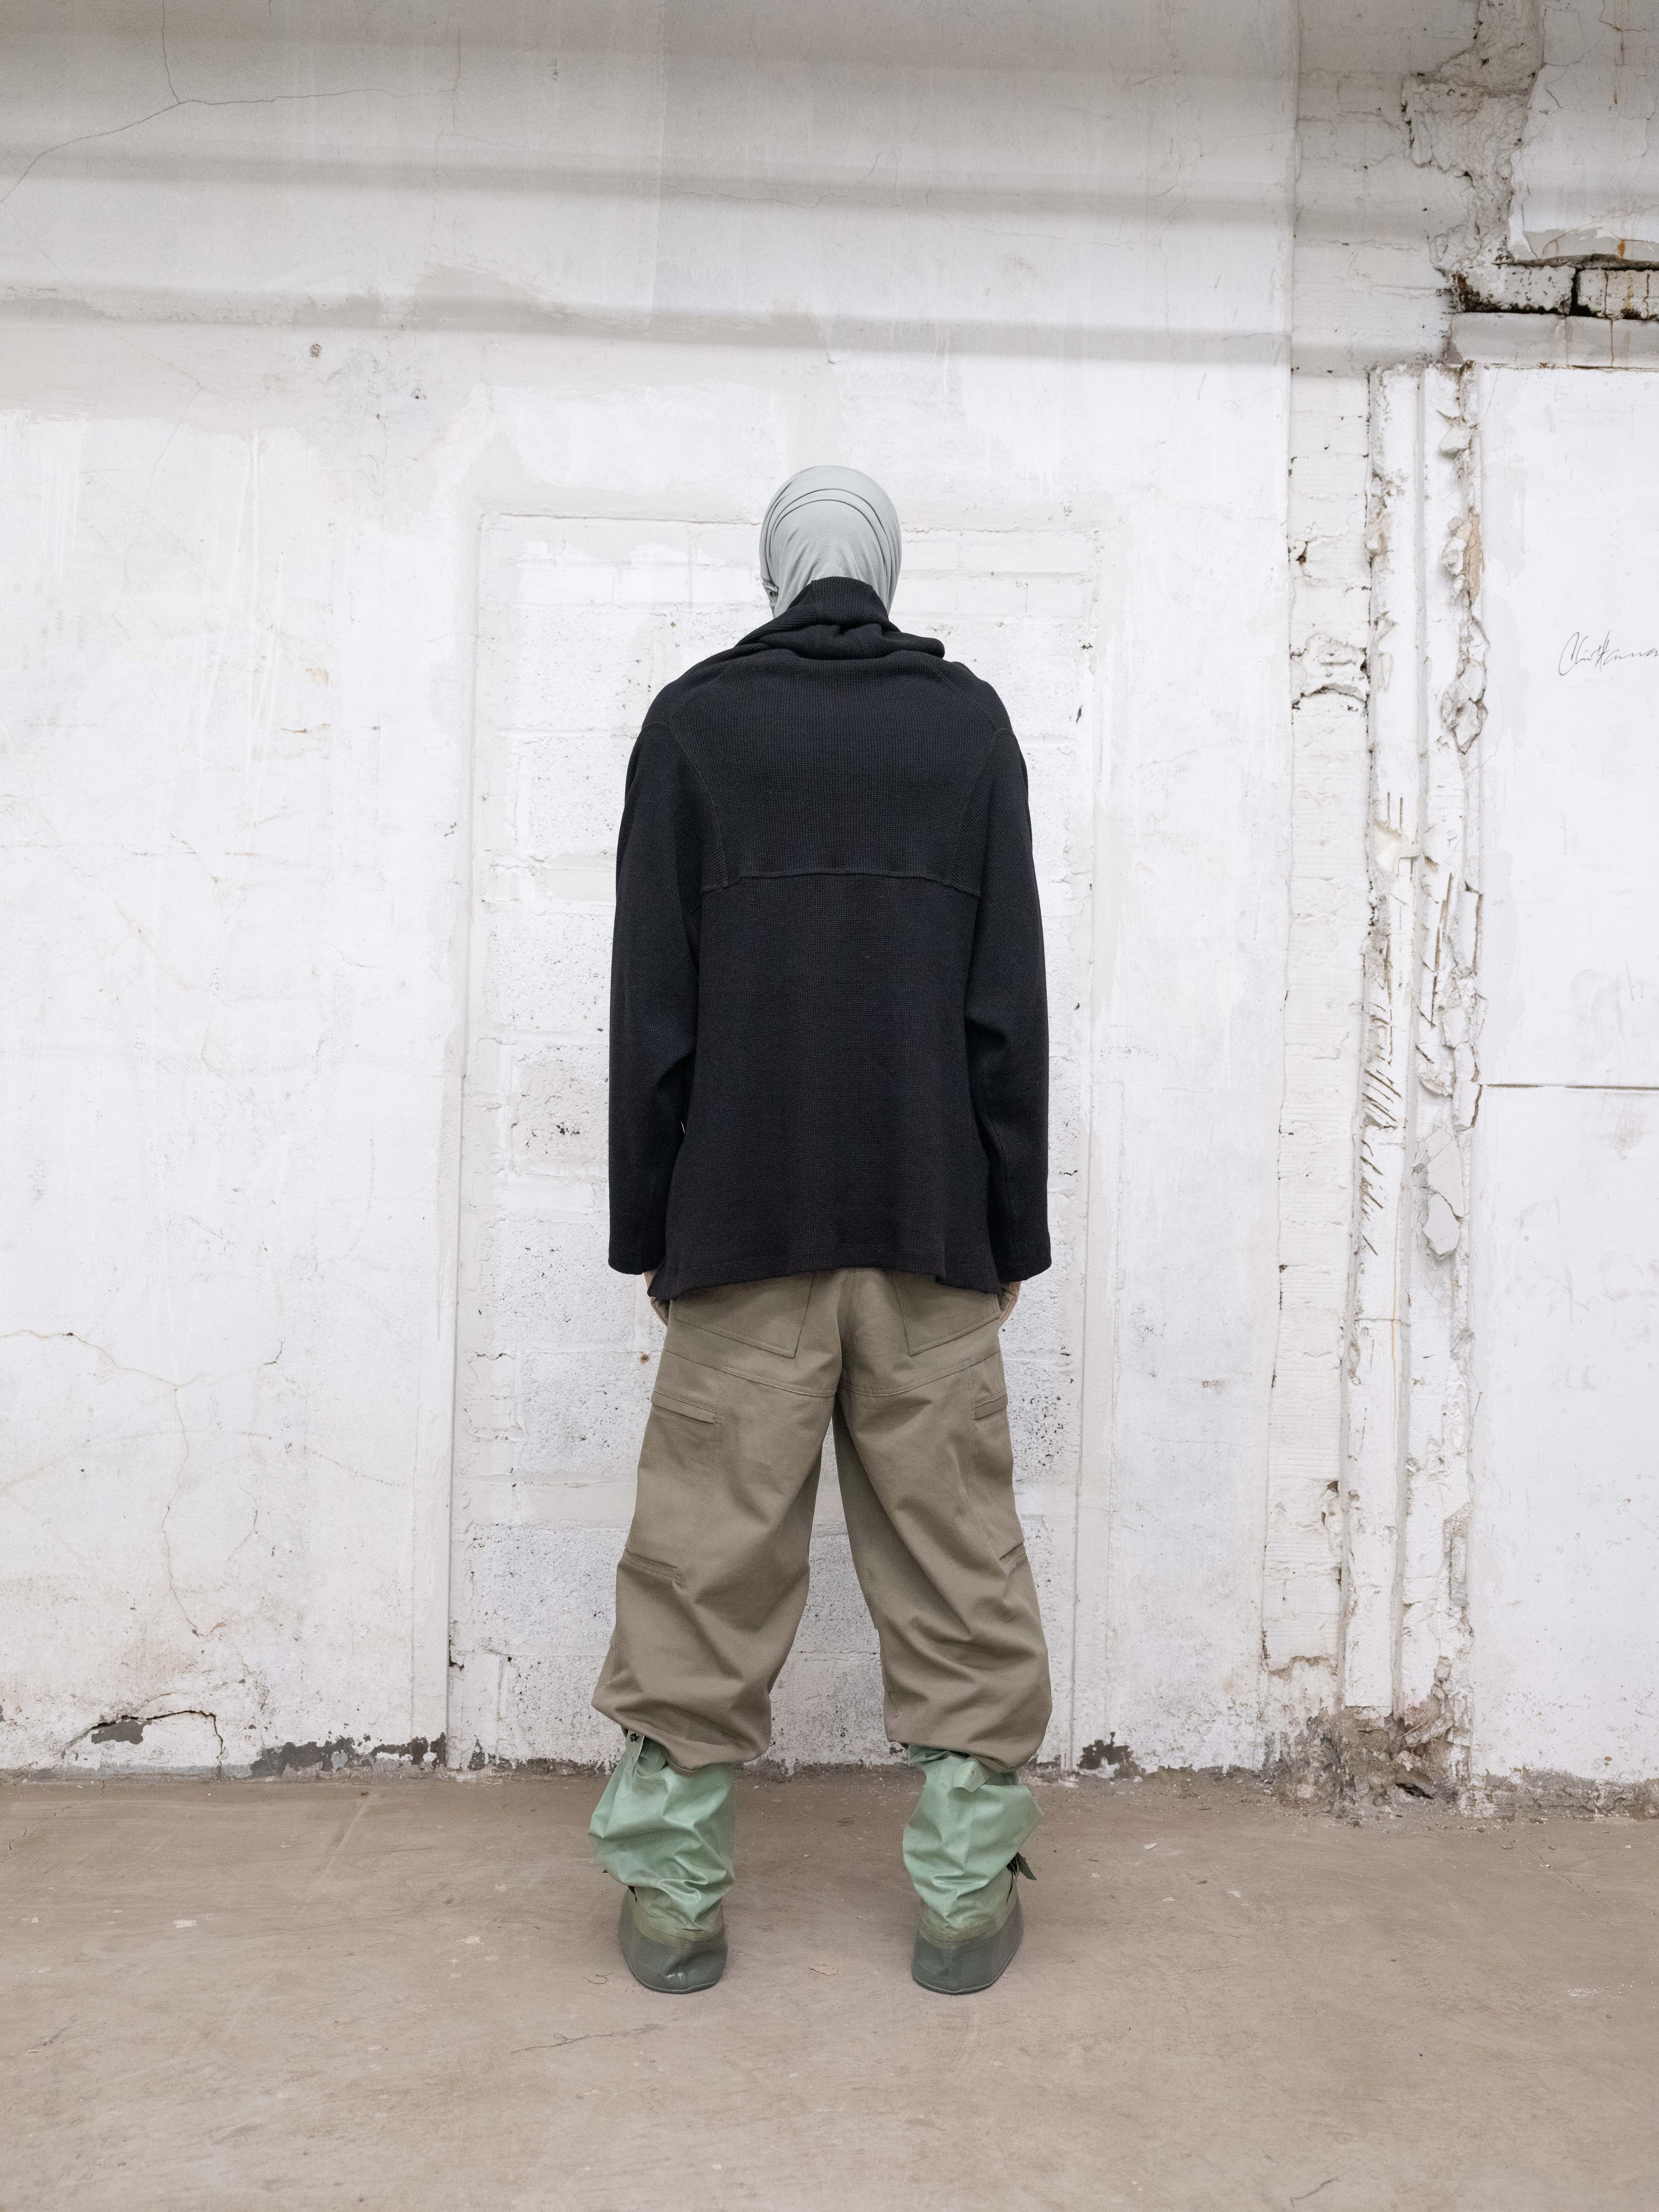 man wearing headscarf v2, single layered armstrong hoodie, cover boots and 3/4 station trousers from bryan jimenez fall/winter 2022